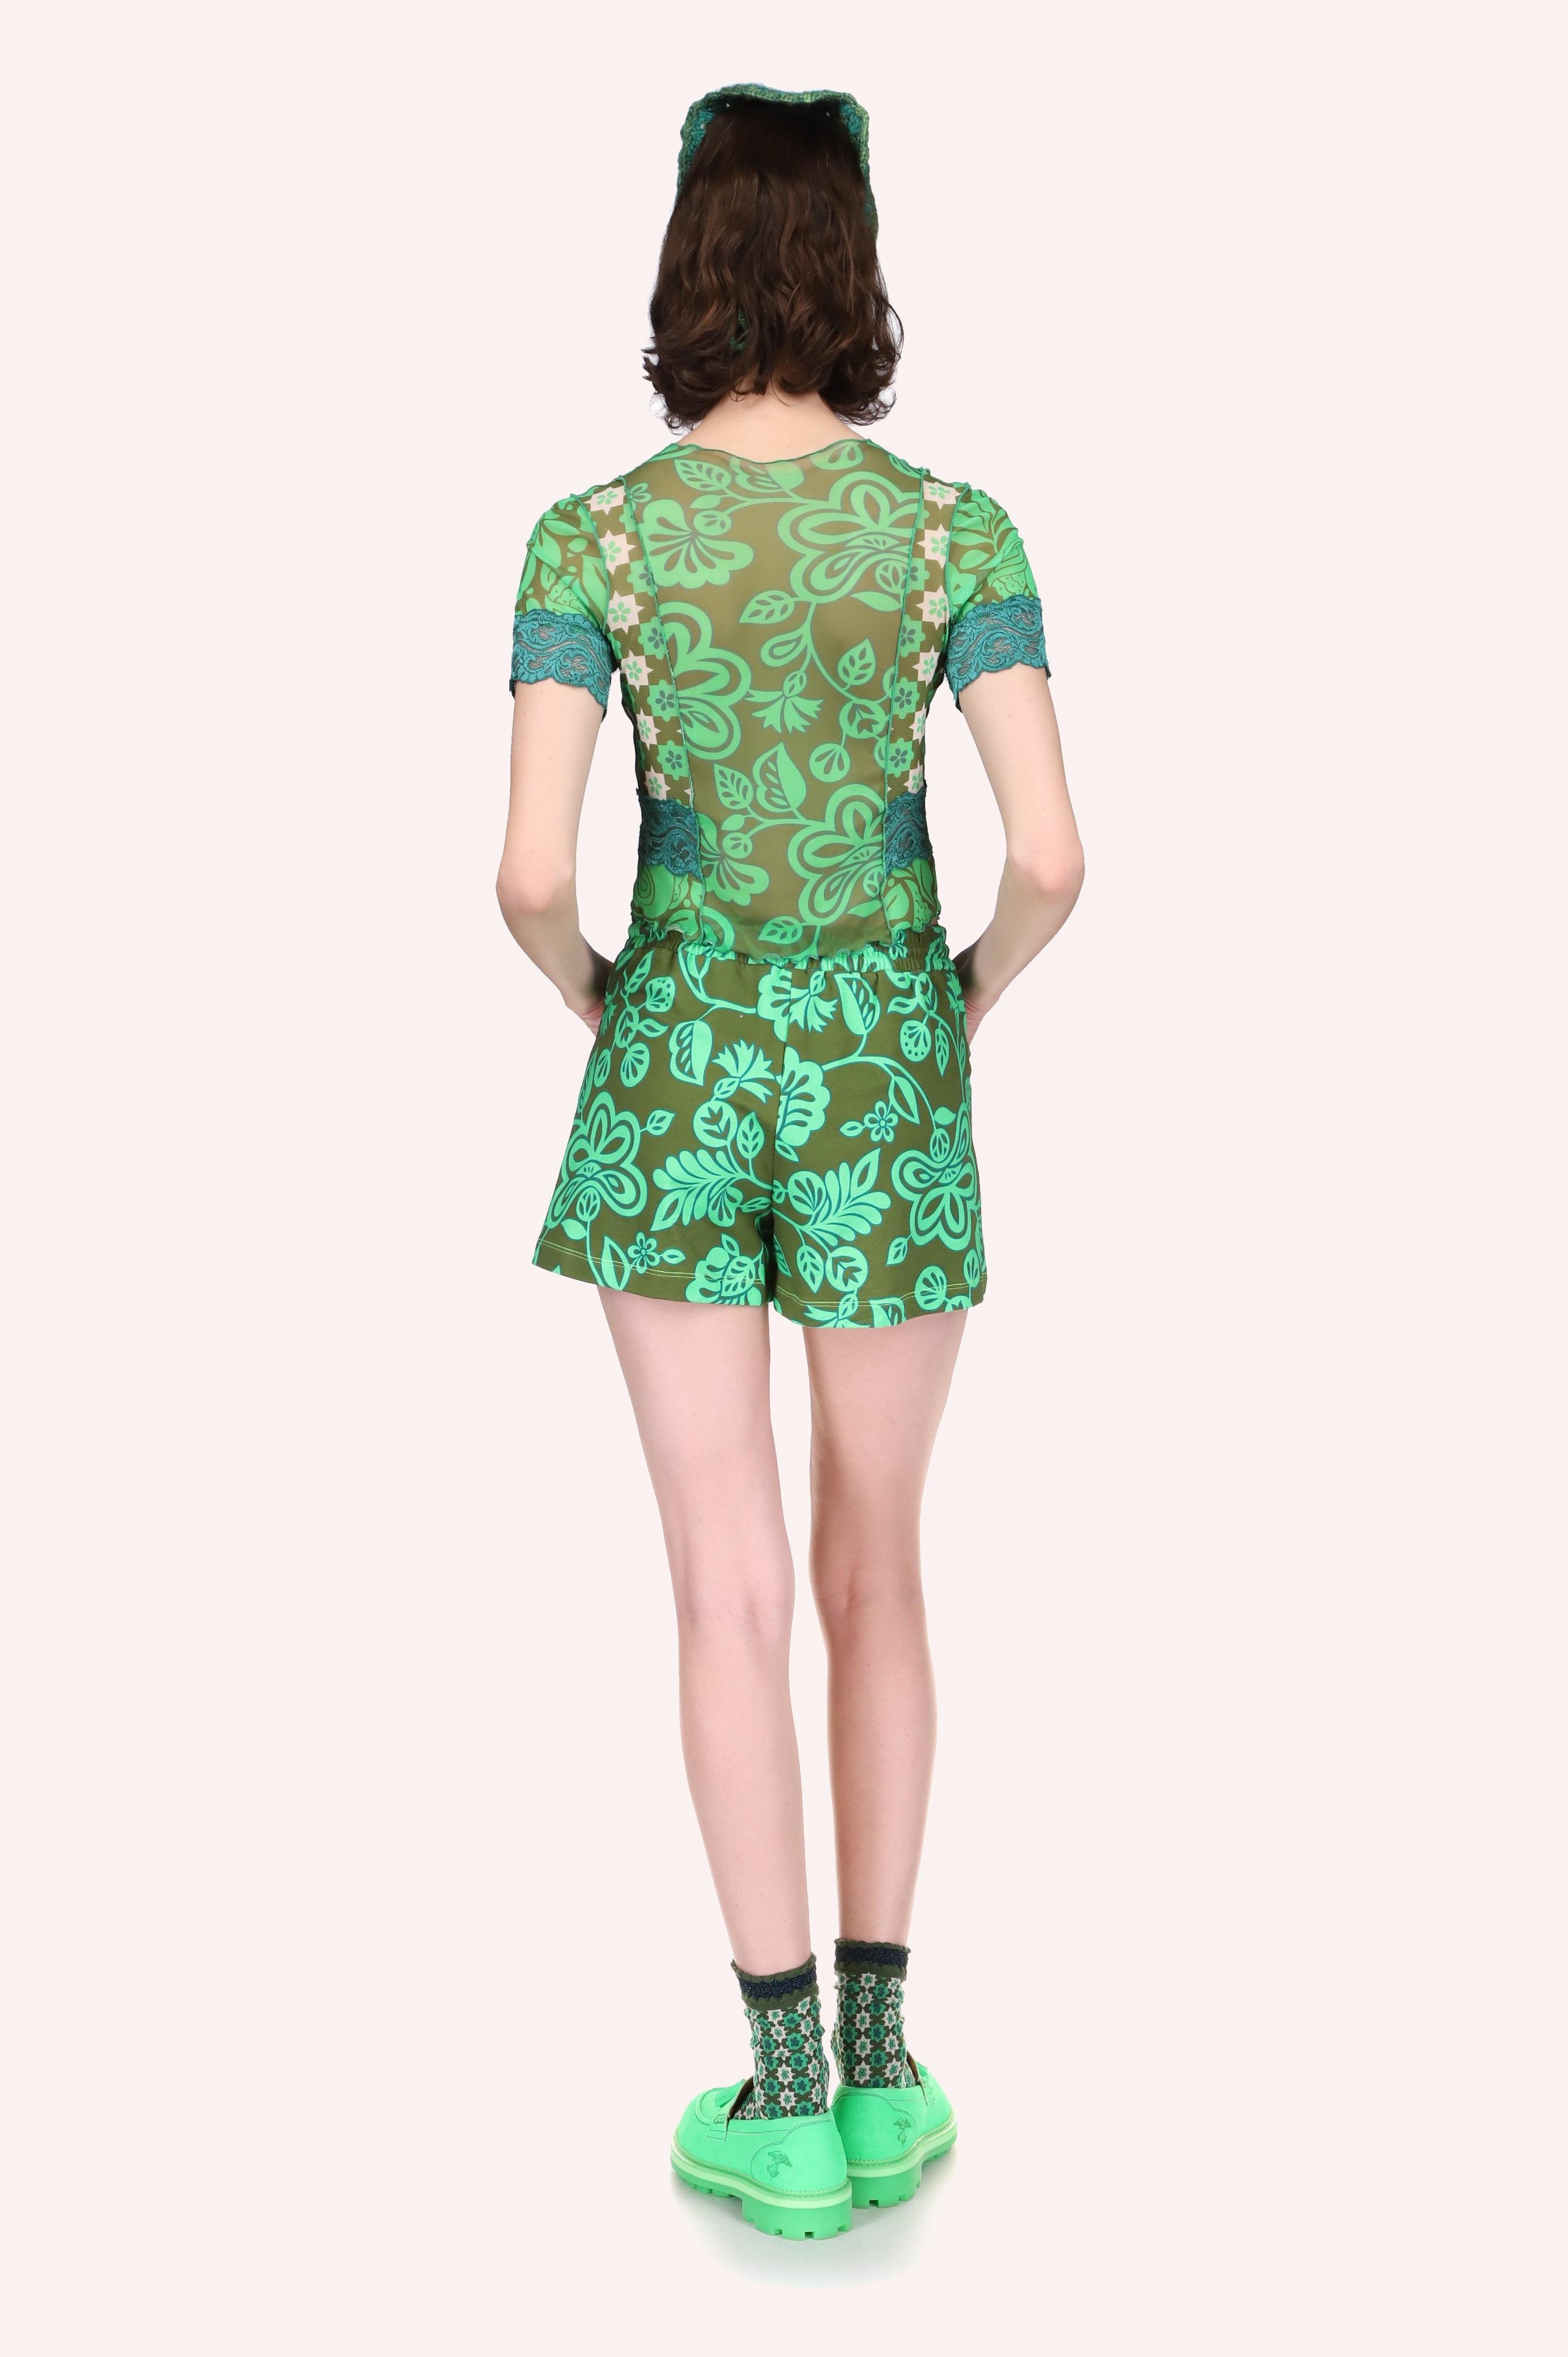 The green and floral pattern is a true masterpiece, and the lace belt adds the perfect touch of elegance and sophistication